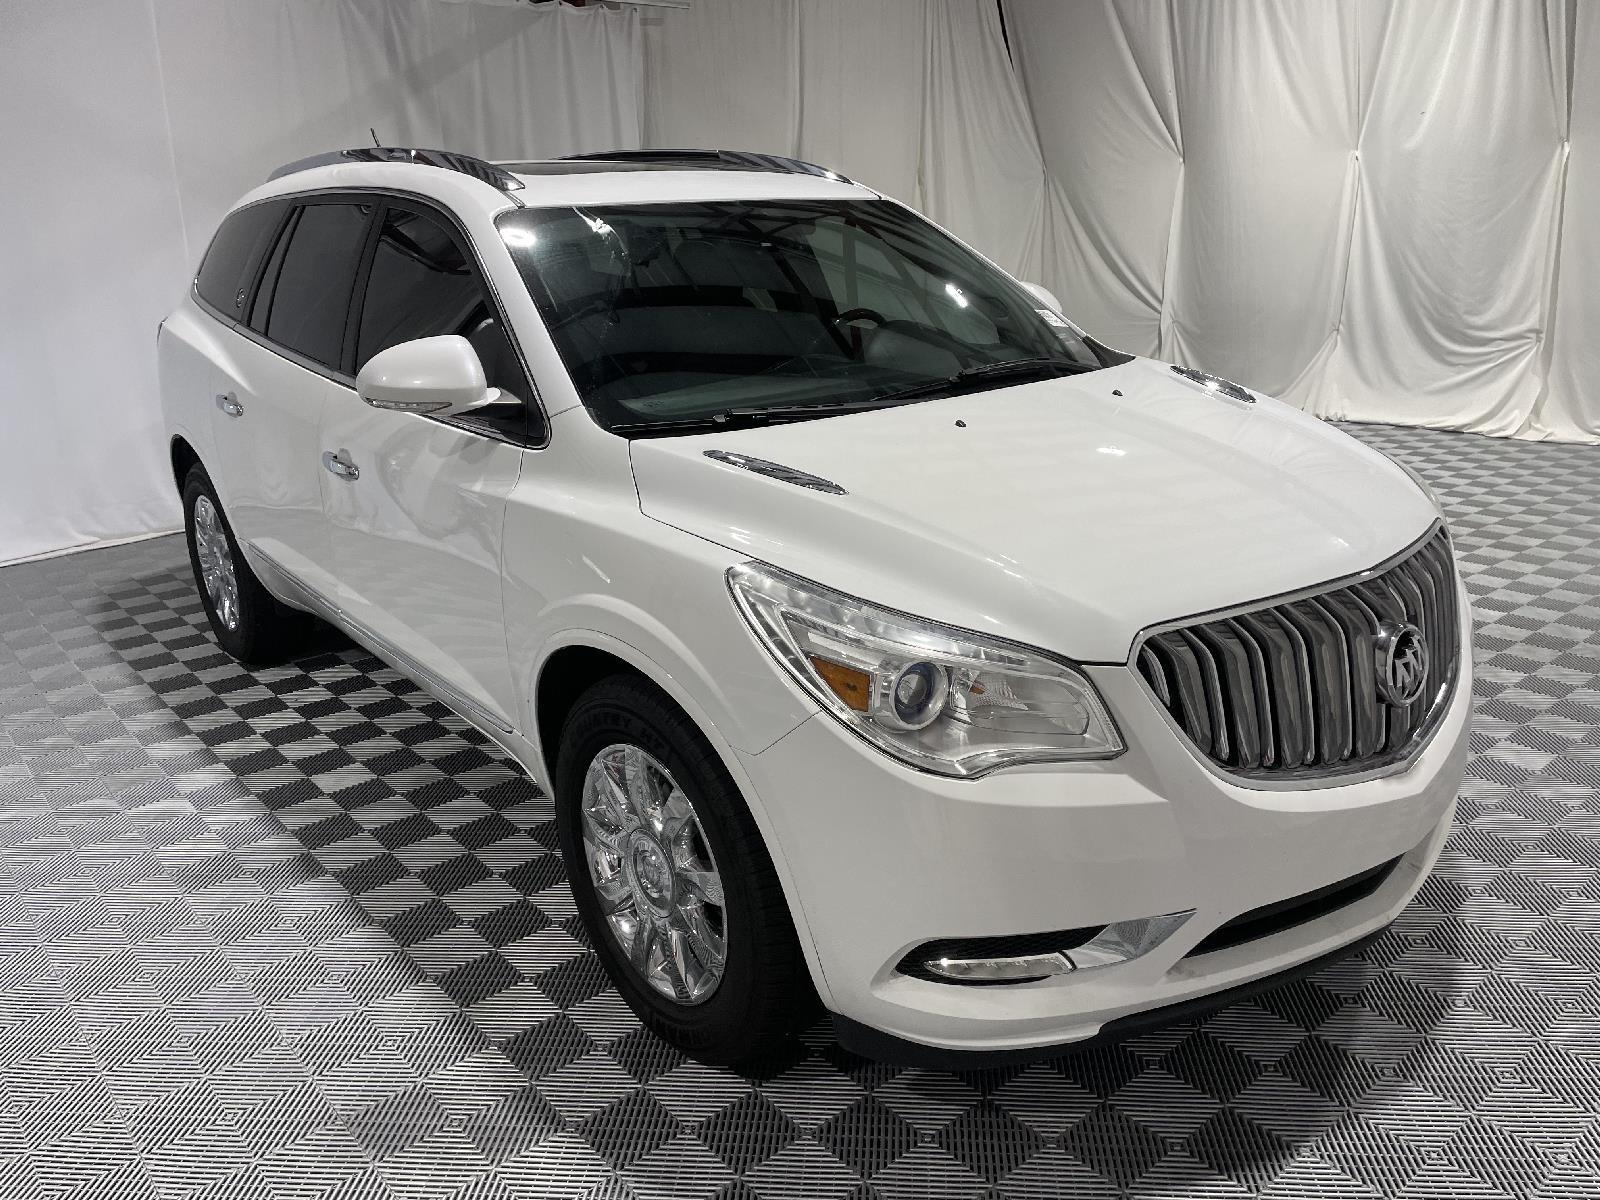 Used 2017 Buick Enclave Premium SUV for sale in St Joseph MO